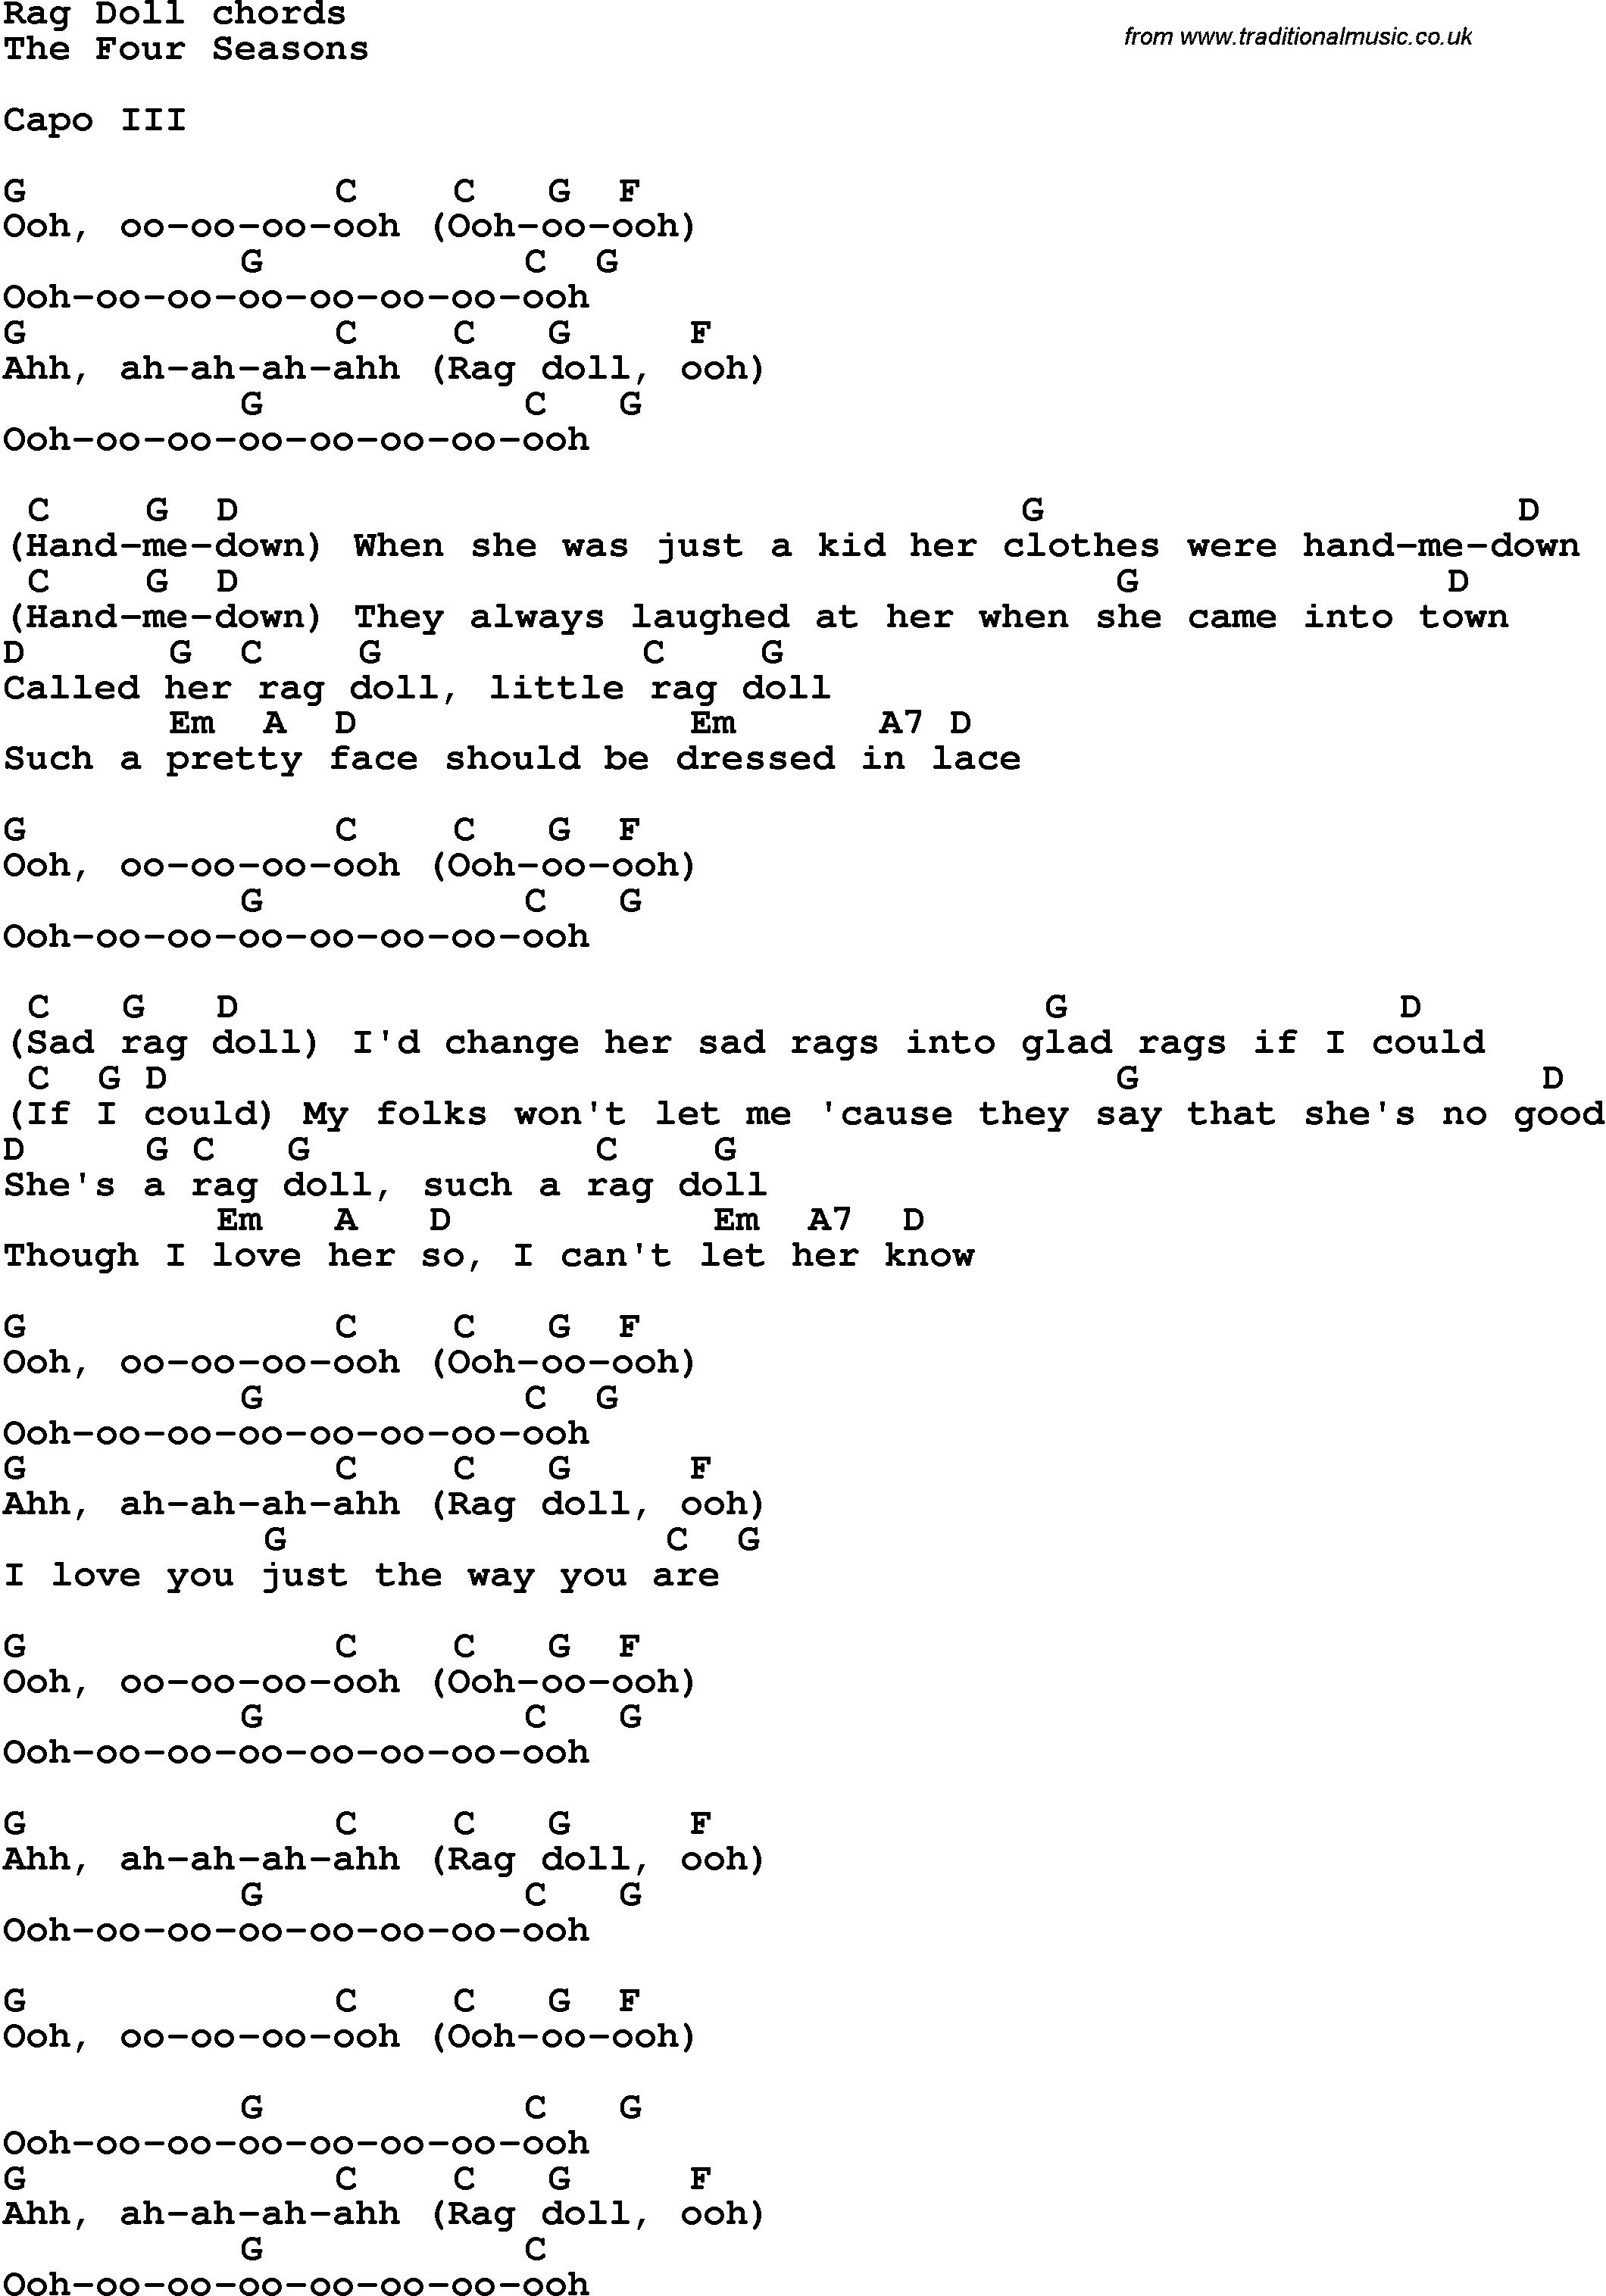 Song Lyrics with guitar chords for Rag Doll